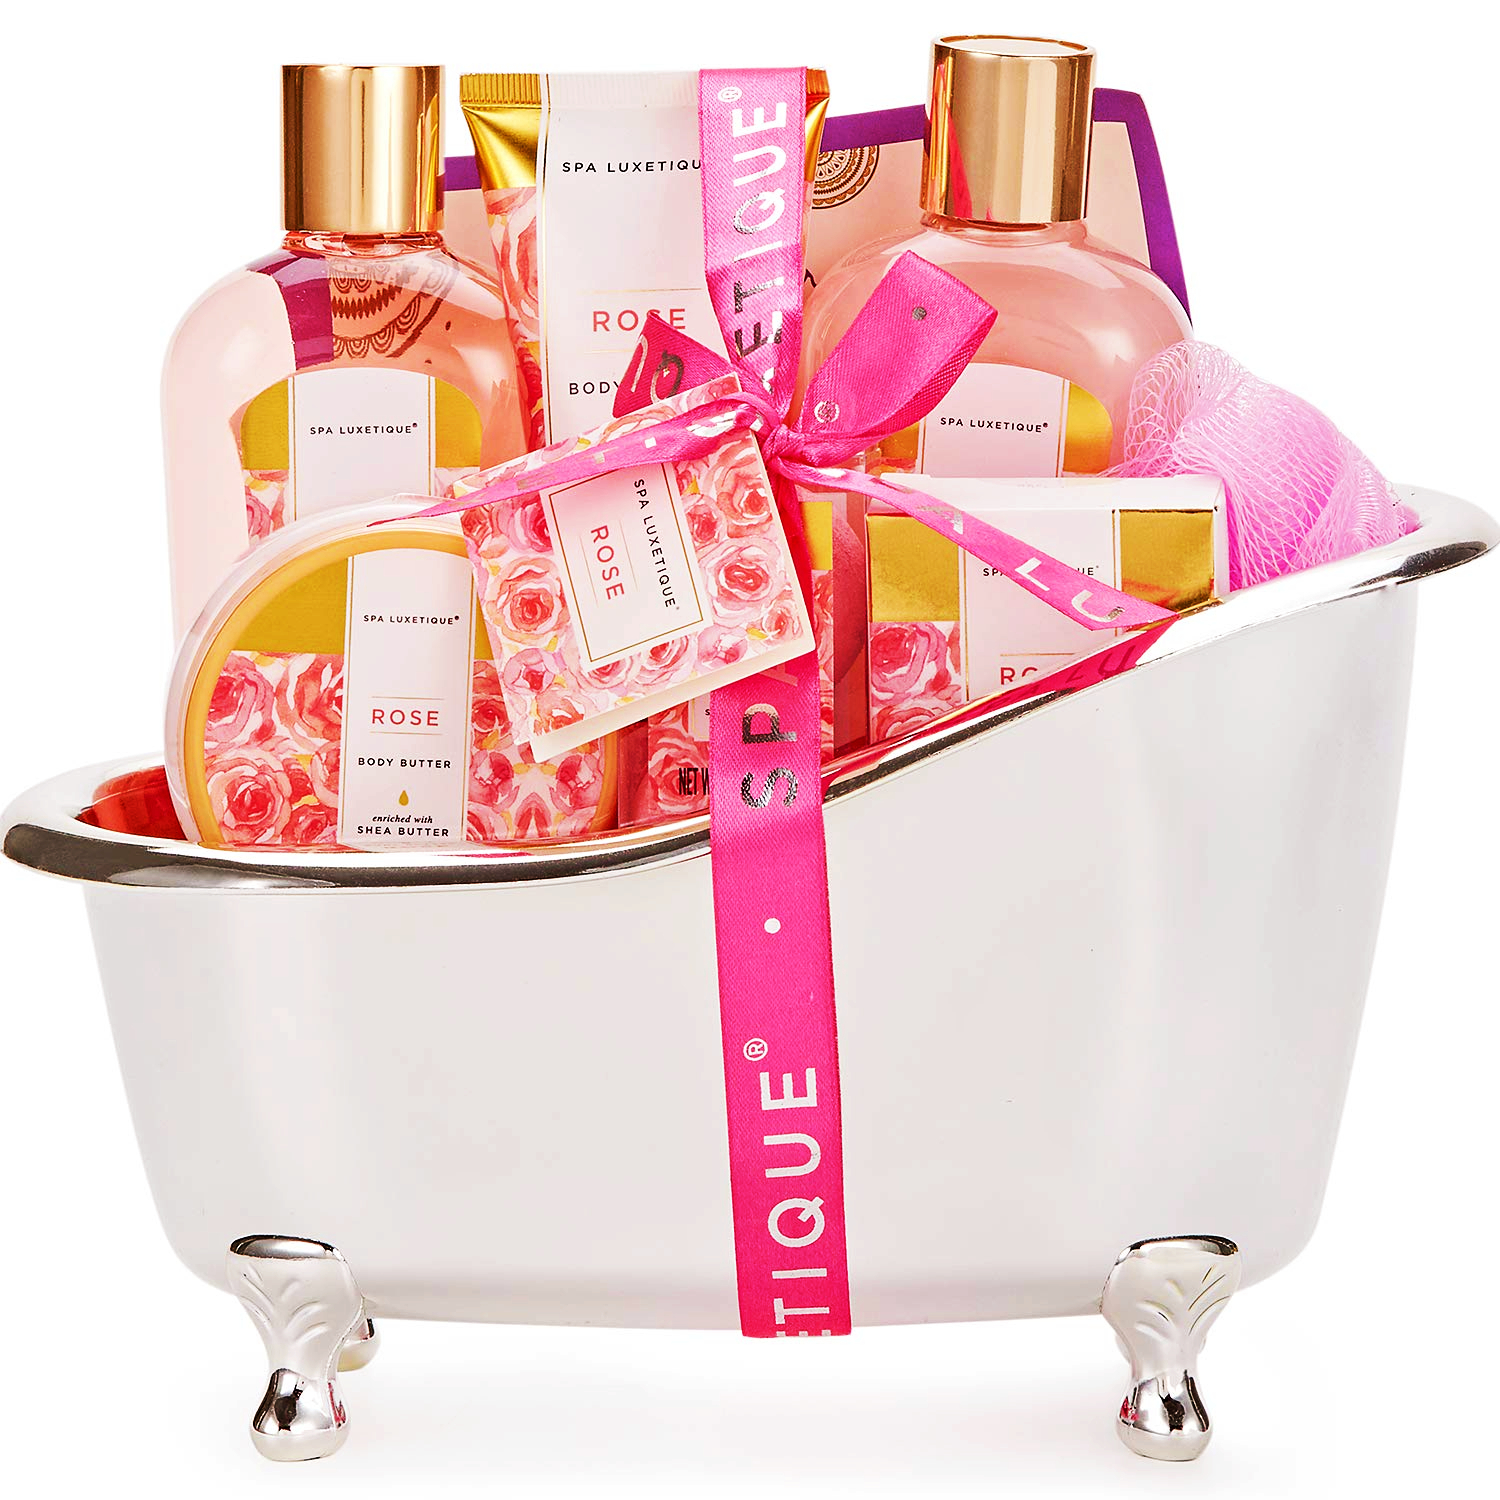 Spa Gift Baskets for Women - 9 Pcs Rose Bath Gift Kits, Birthday Holiday Beauty Body Care Gift Sets for Her - image 1 of 10